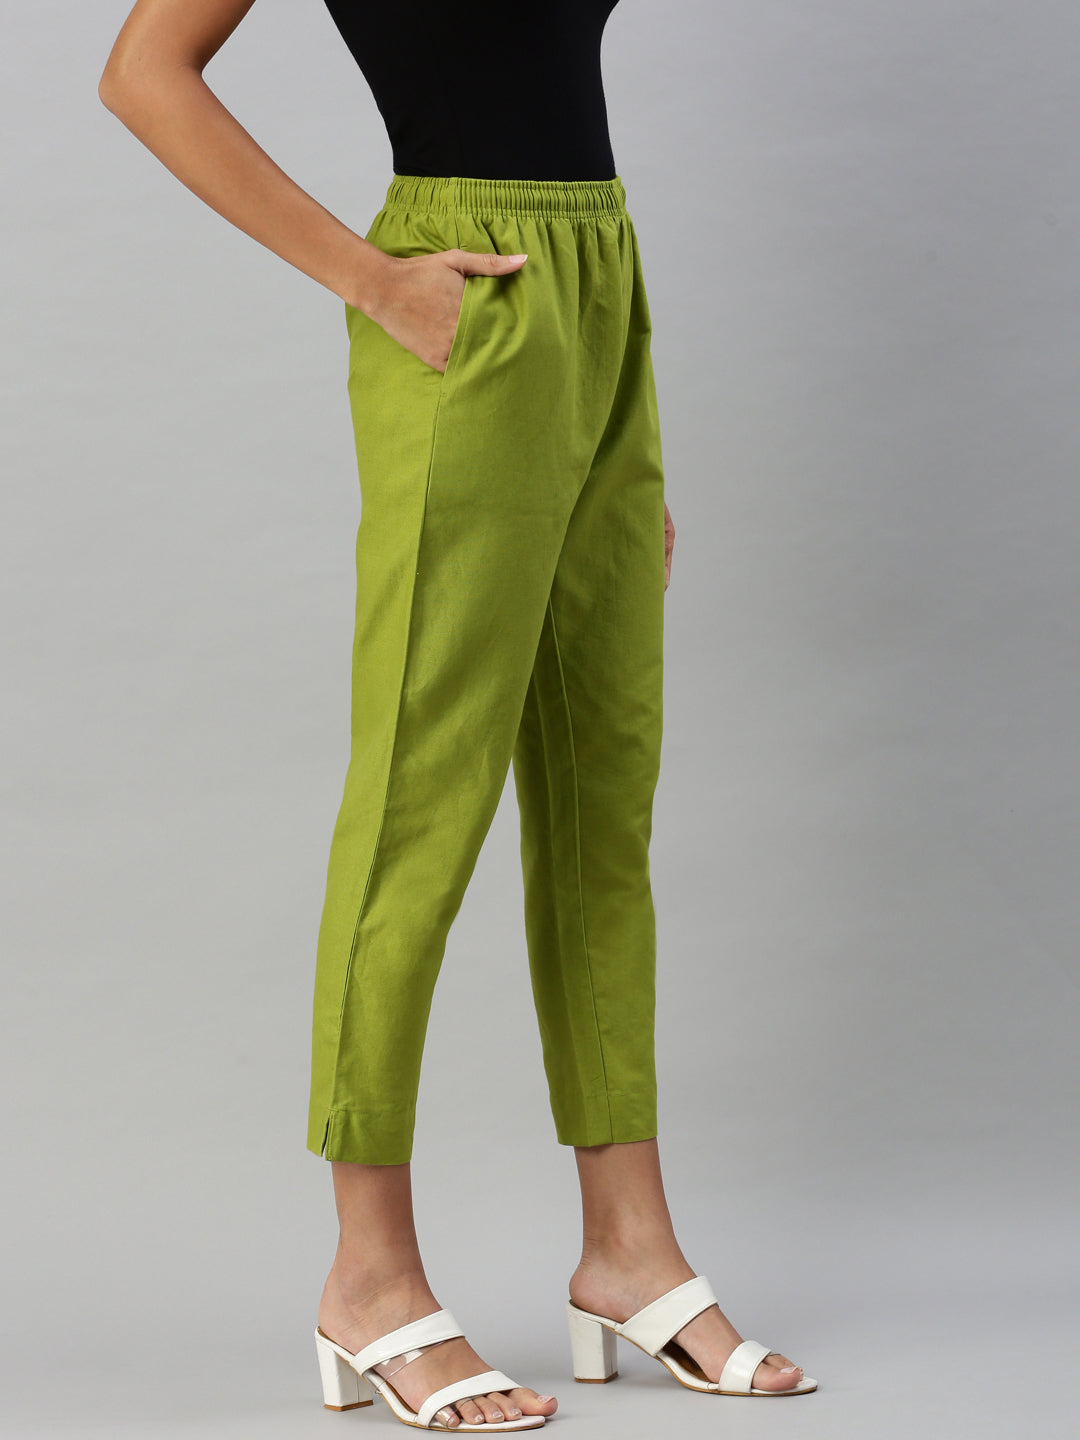 Buy Women Casual Wear Pants in India - Trousers Also Available